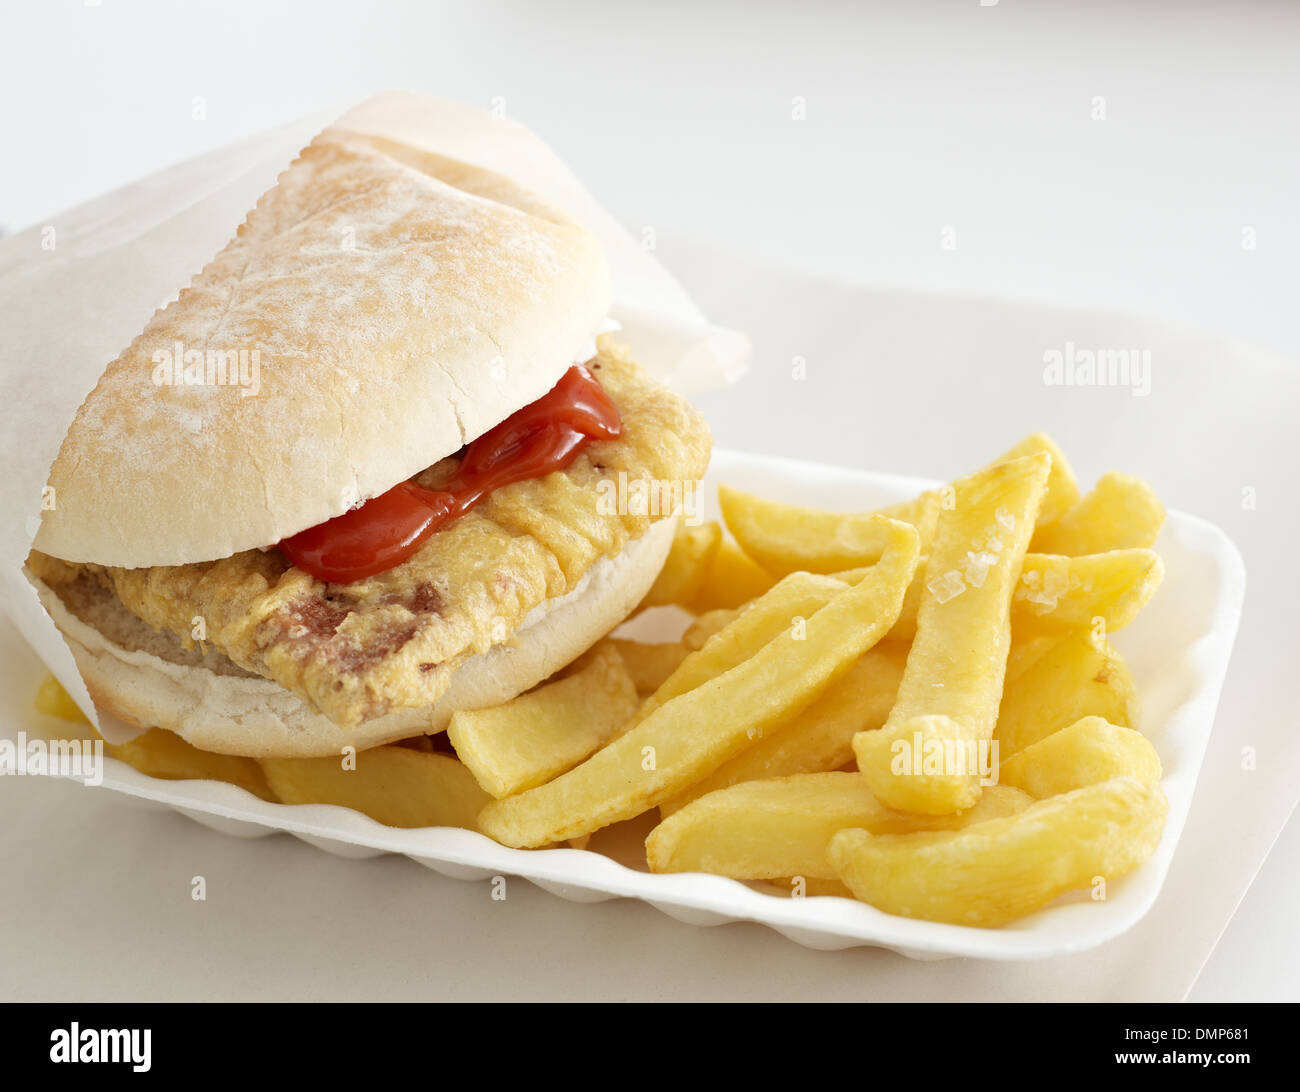 chips tray battered burger sauce paper takeaway Stock Photo